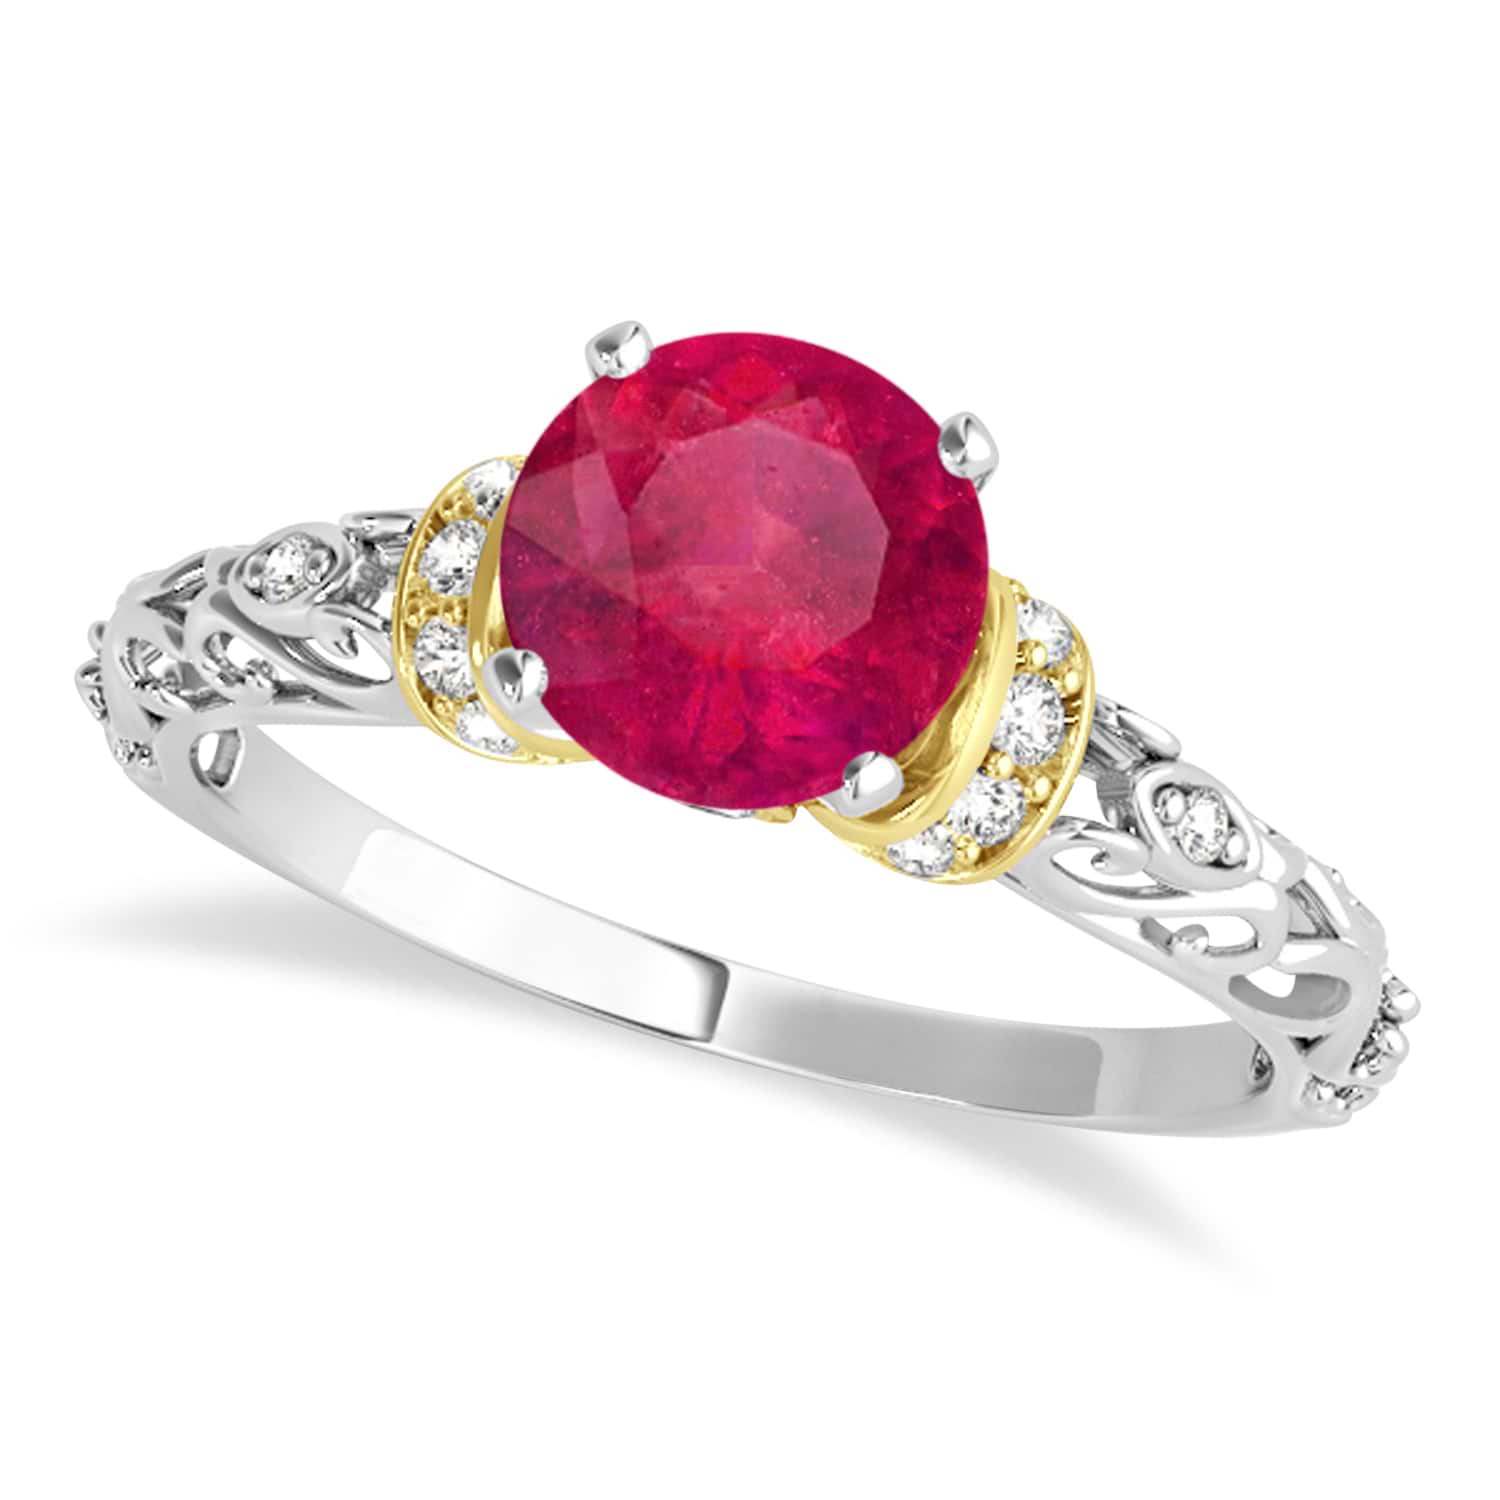 Ruby & Diamond Antique Style Engagement Ring 14k Two-Tone Gold (0.87ct)